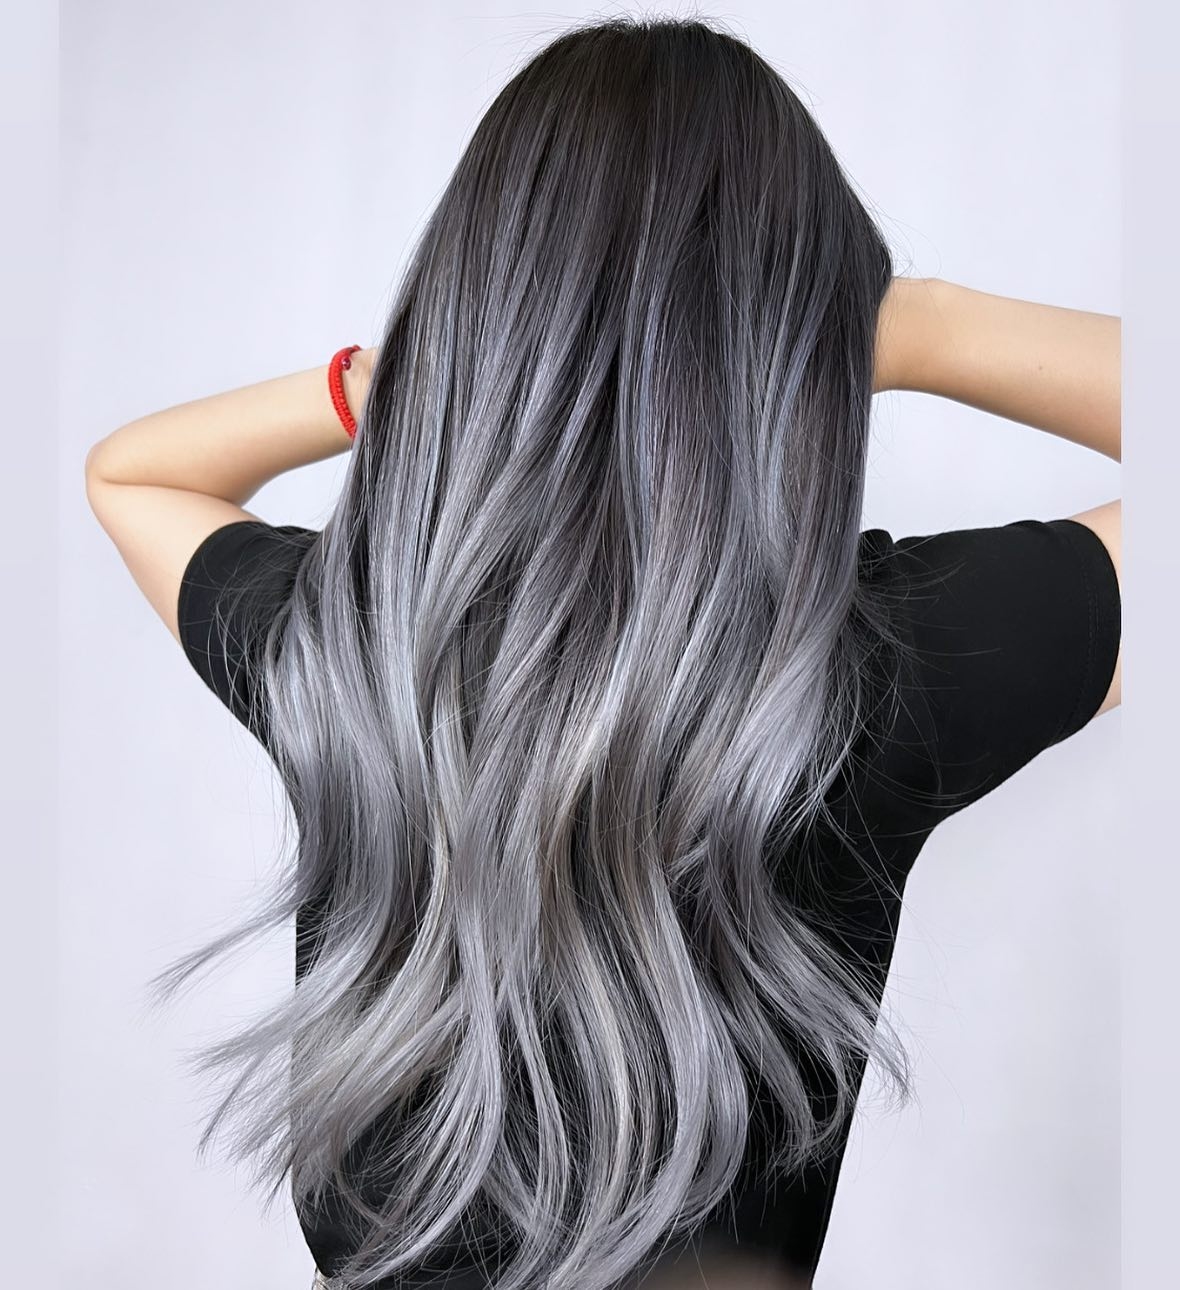 Long Smokey Ombre Hair Color with Dark Roots